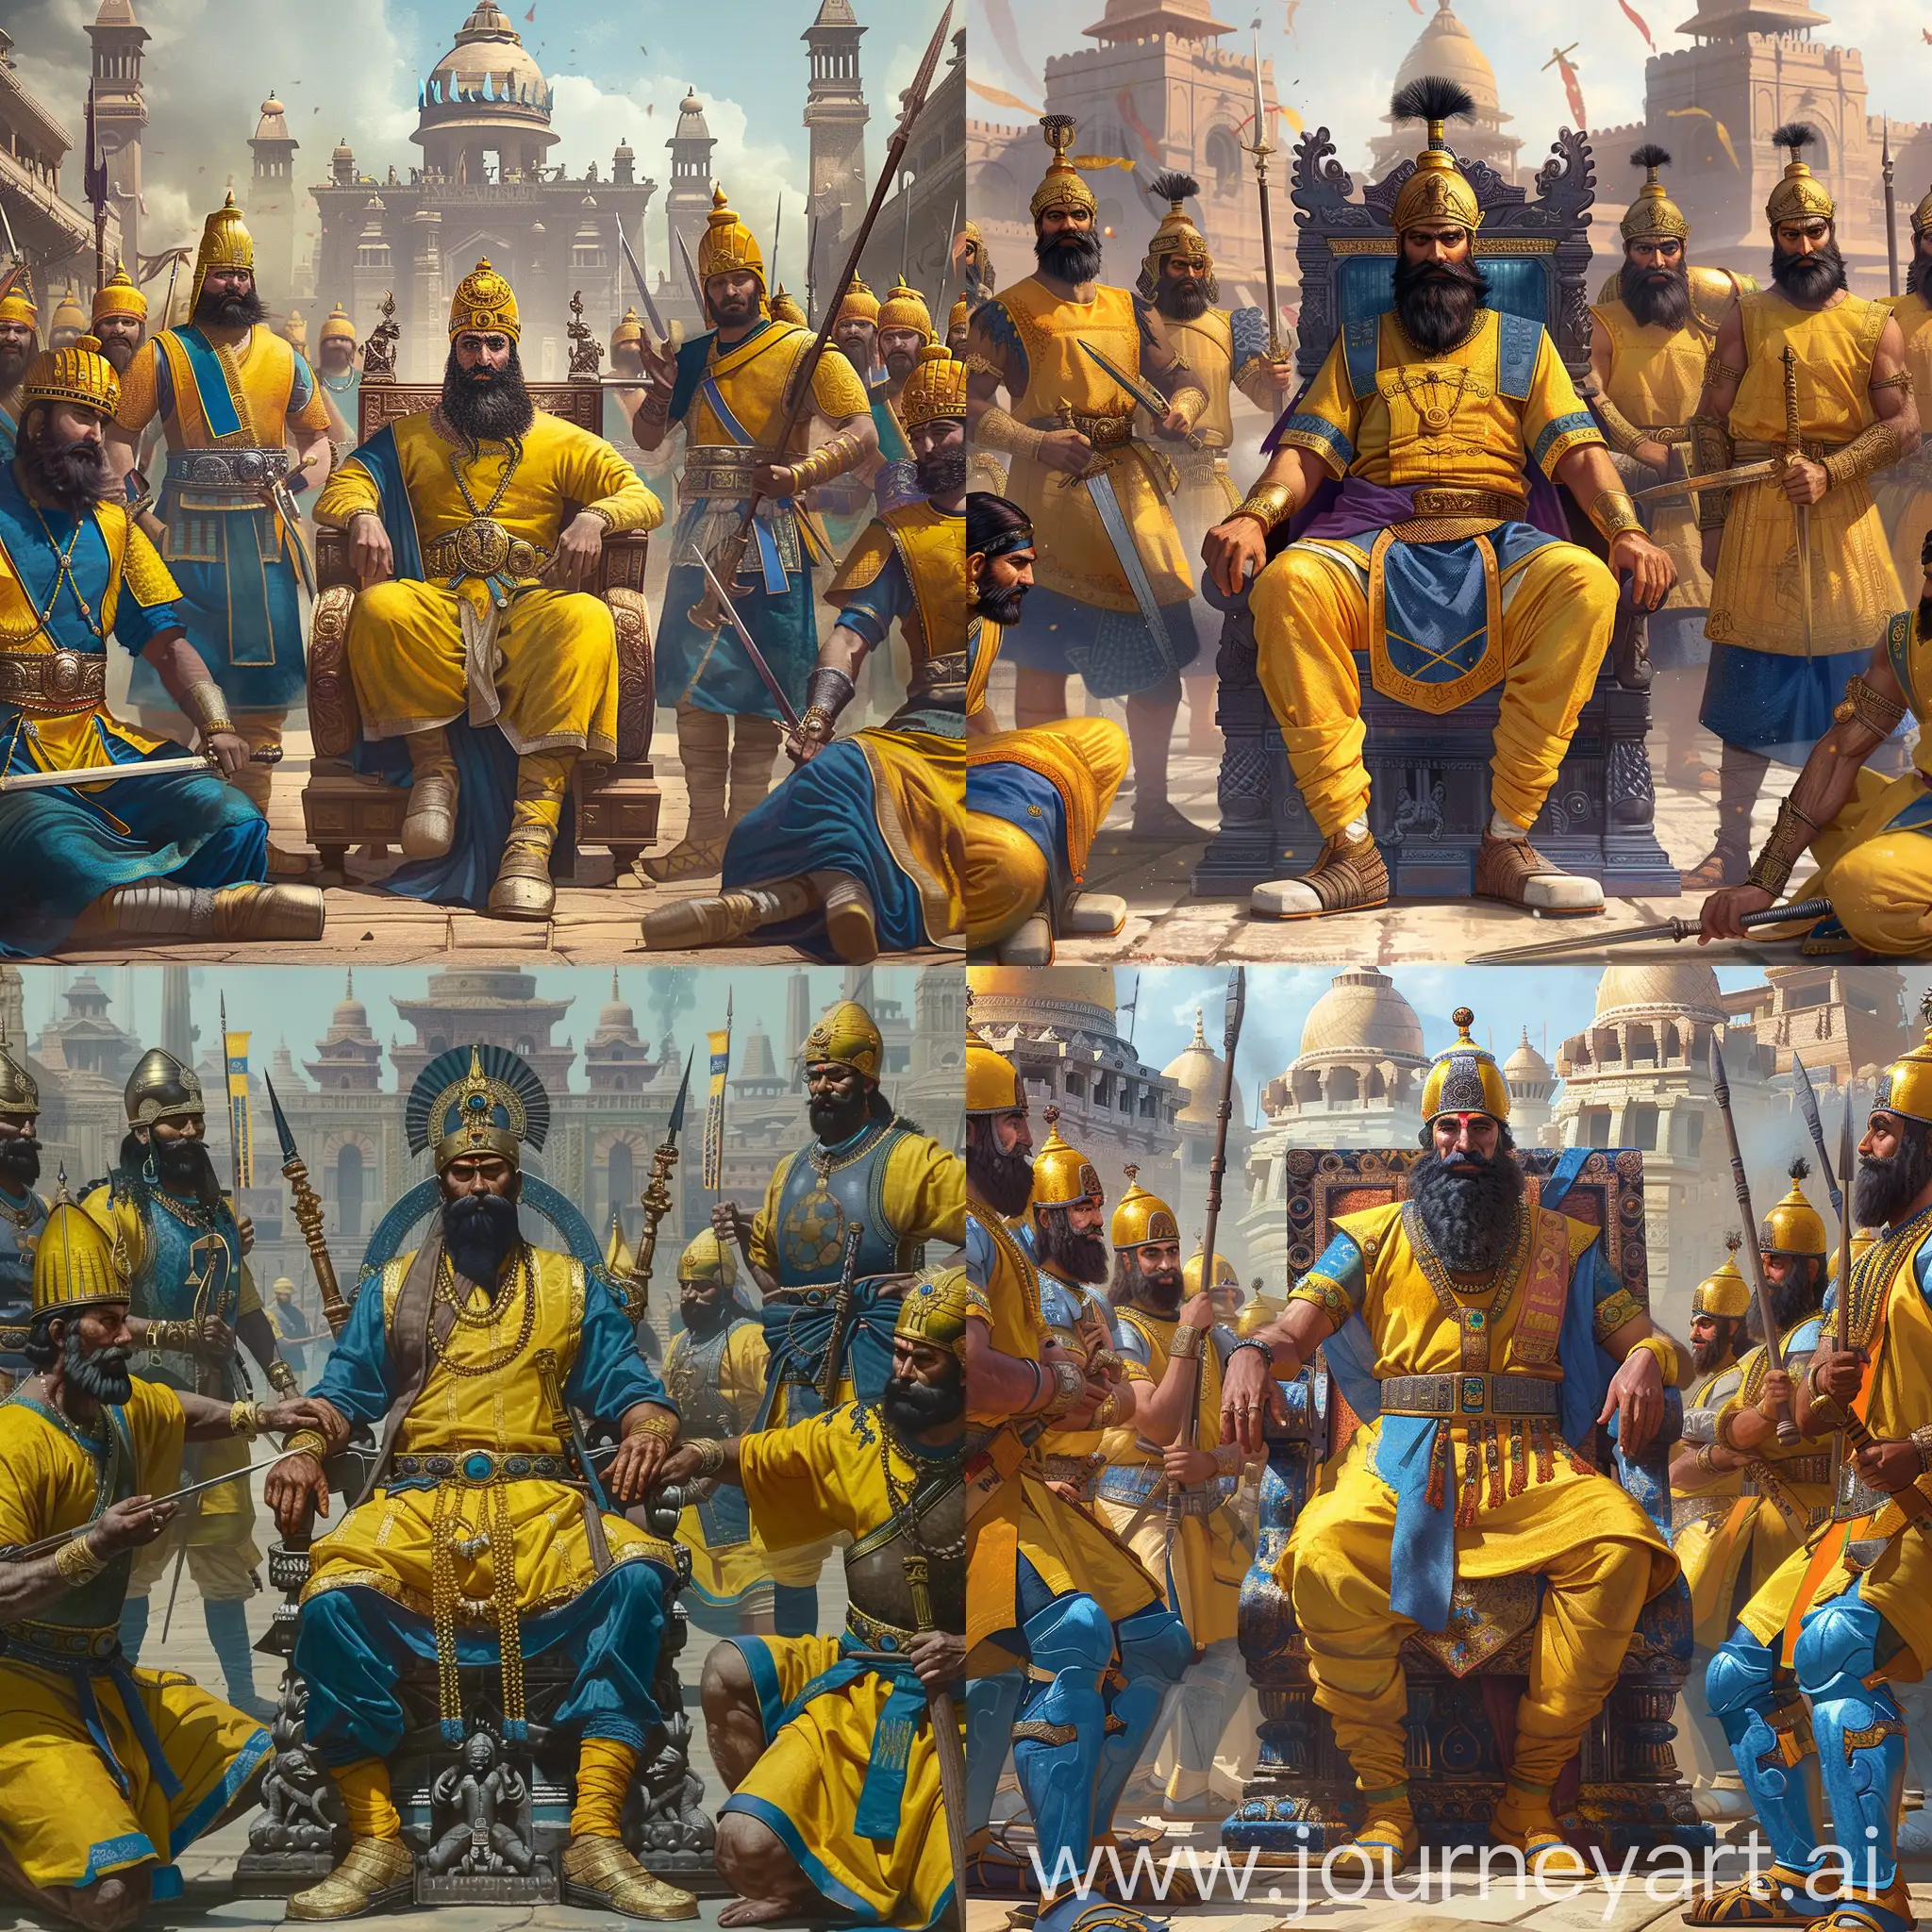 Ancient-Tocharians-Kushan-Emperor-on-Imperial-Throne-Surrounded-by-Warriors-in-Indian-Kushan-Palace